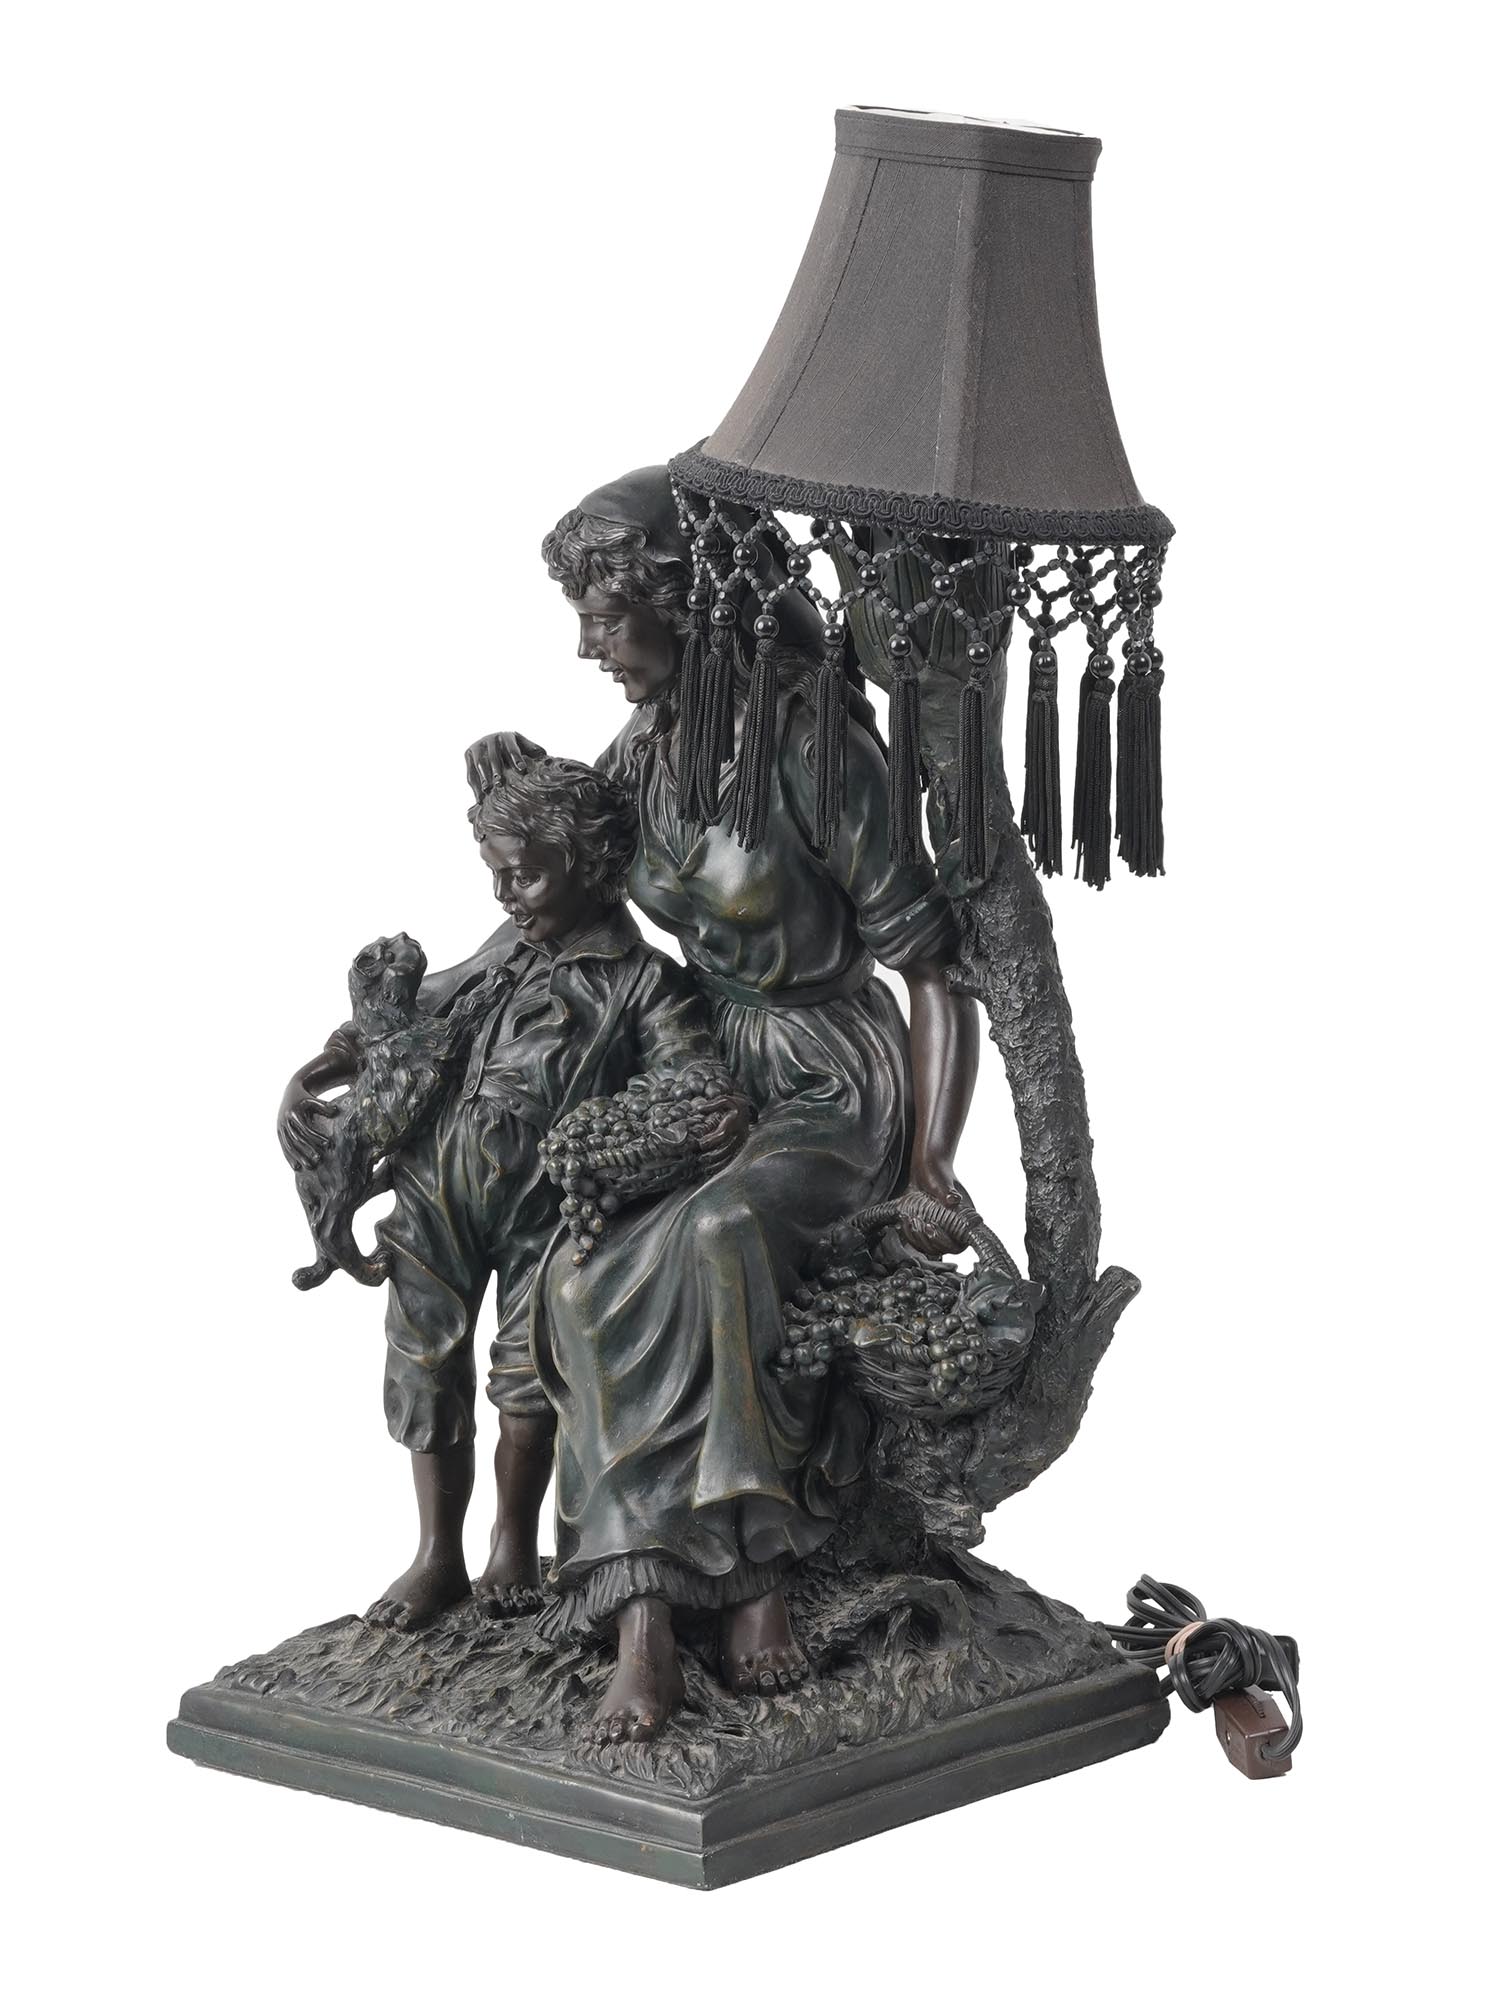 BLACK SCULPTURAL TABLE LAMP MOTHER WITH CHILD PIC-1